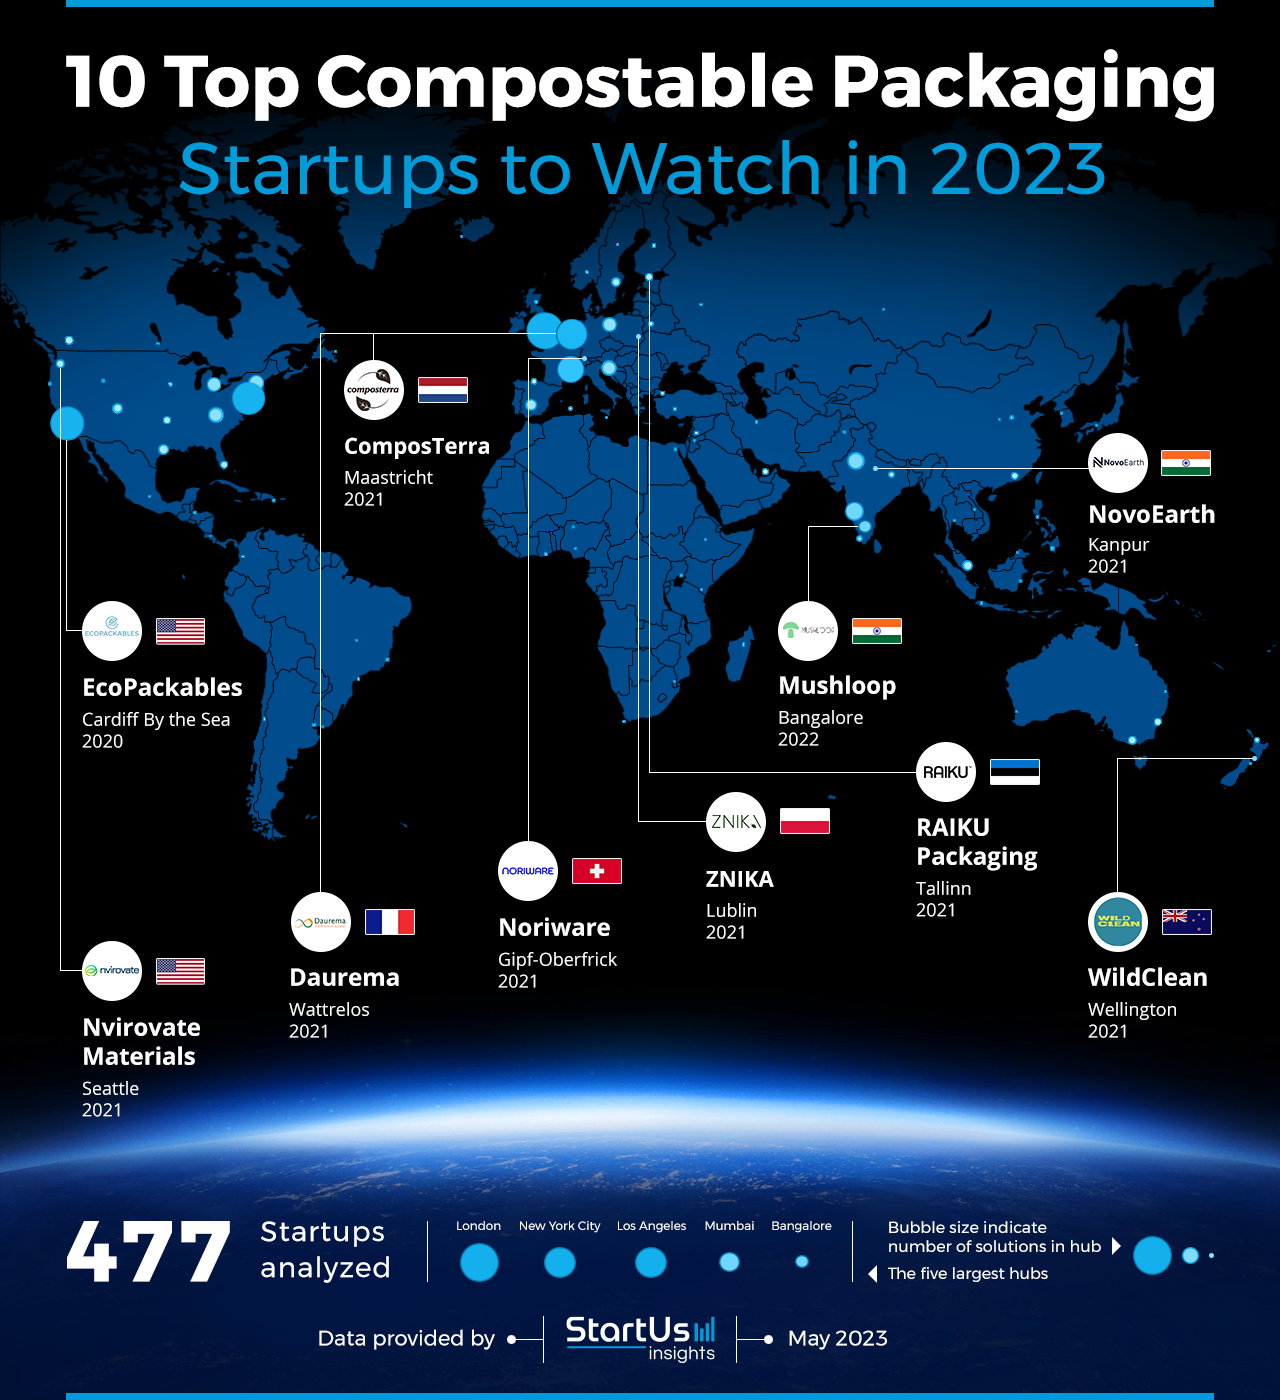 Compostable-Packaging-Startups-to-Watch-Heat-Map-StartUs-Insights-noresize